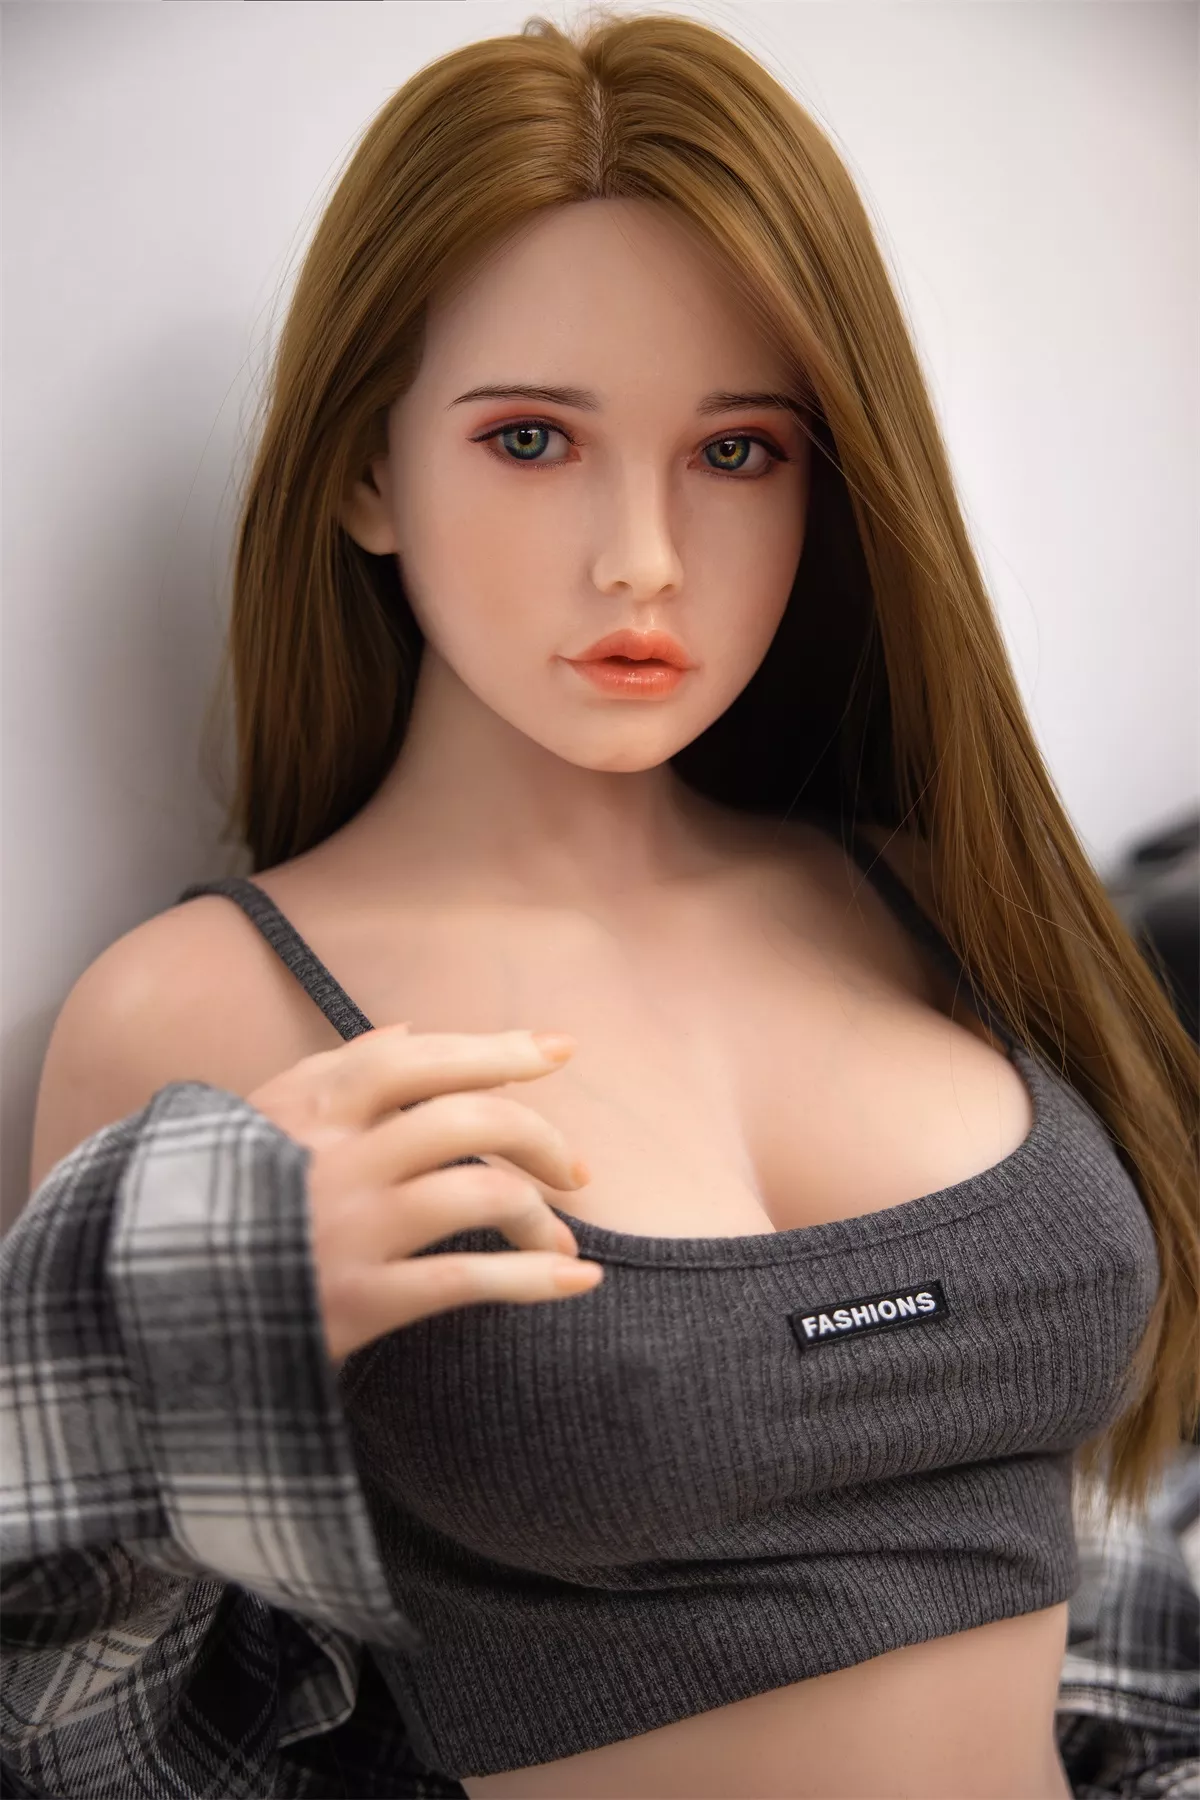 Clover - Big Boobs Sexy Realistic Silicone Sex Doll With Blonde Hair (5 Sizes)